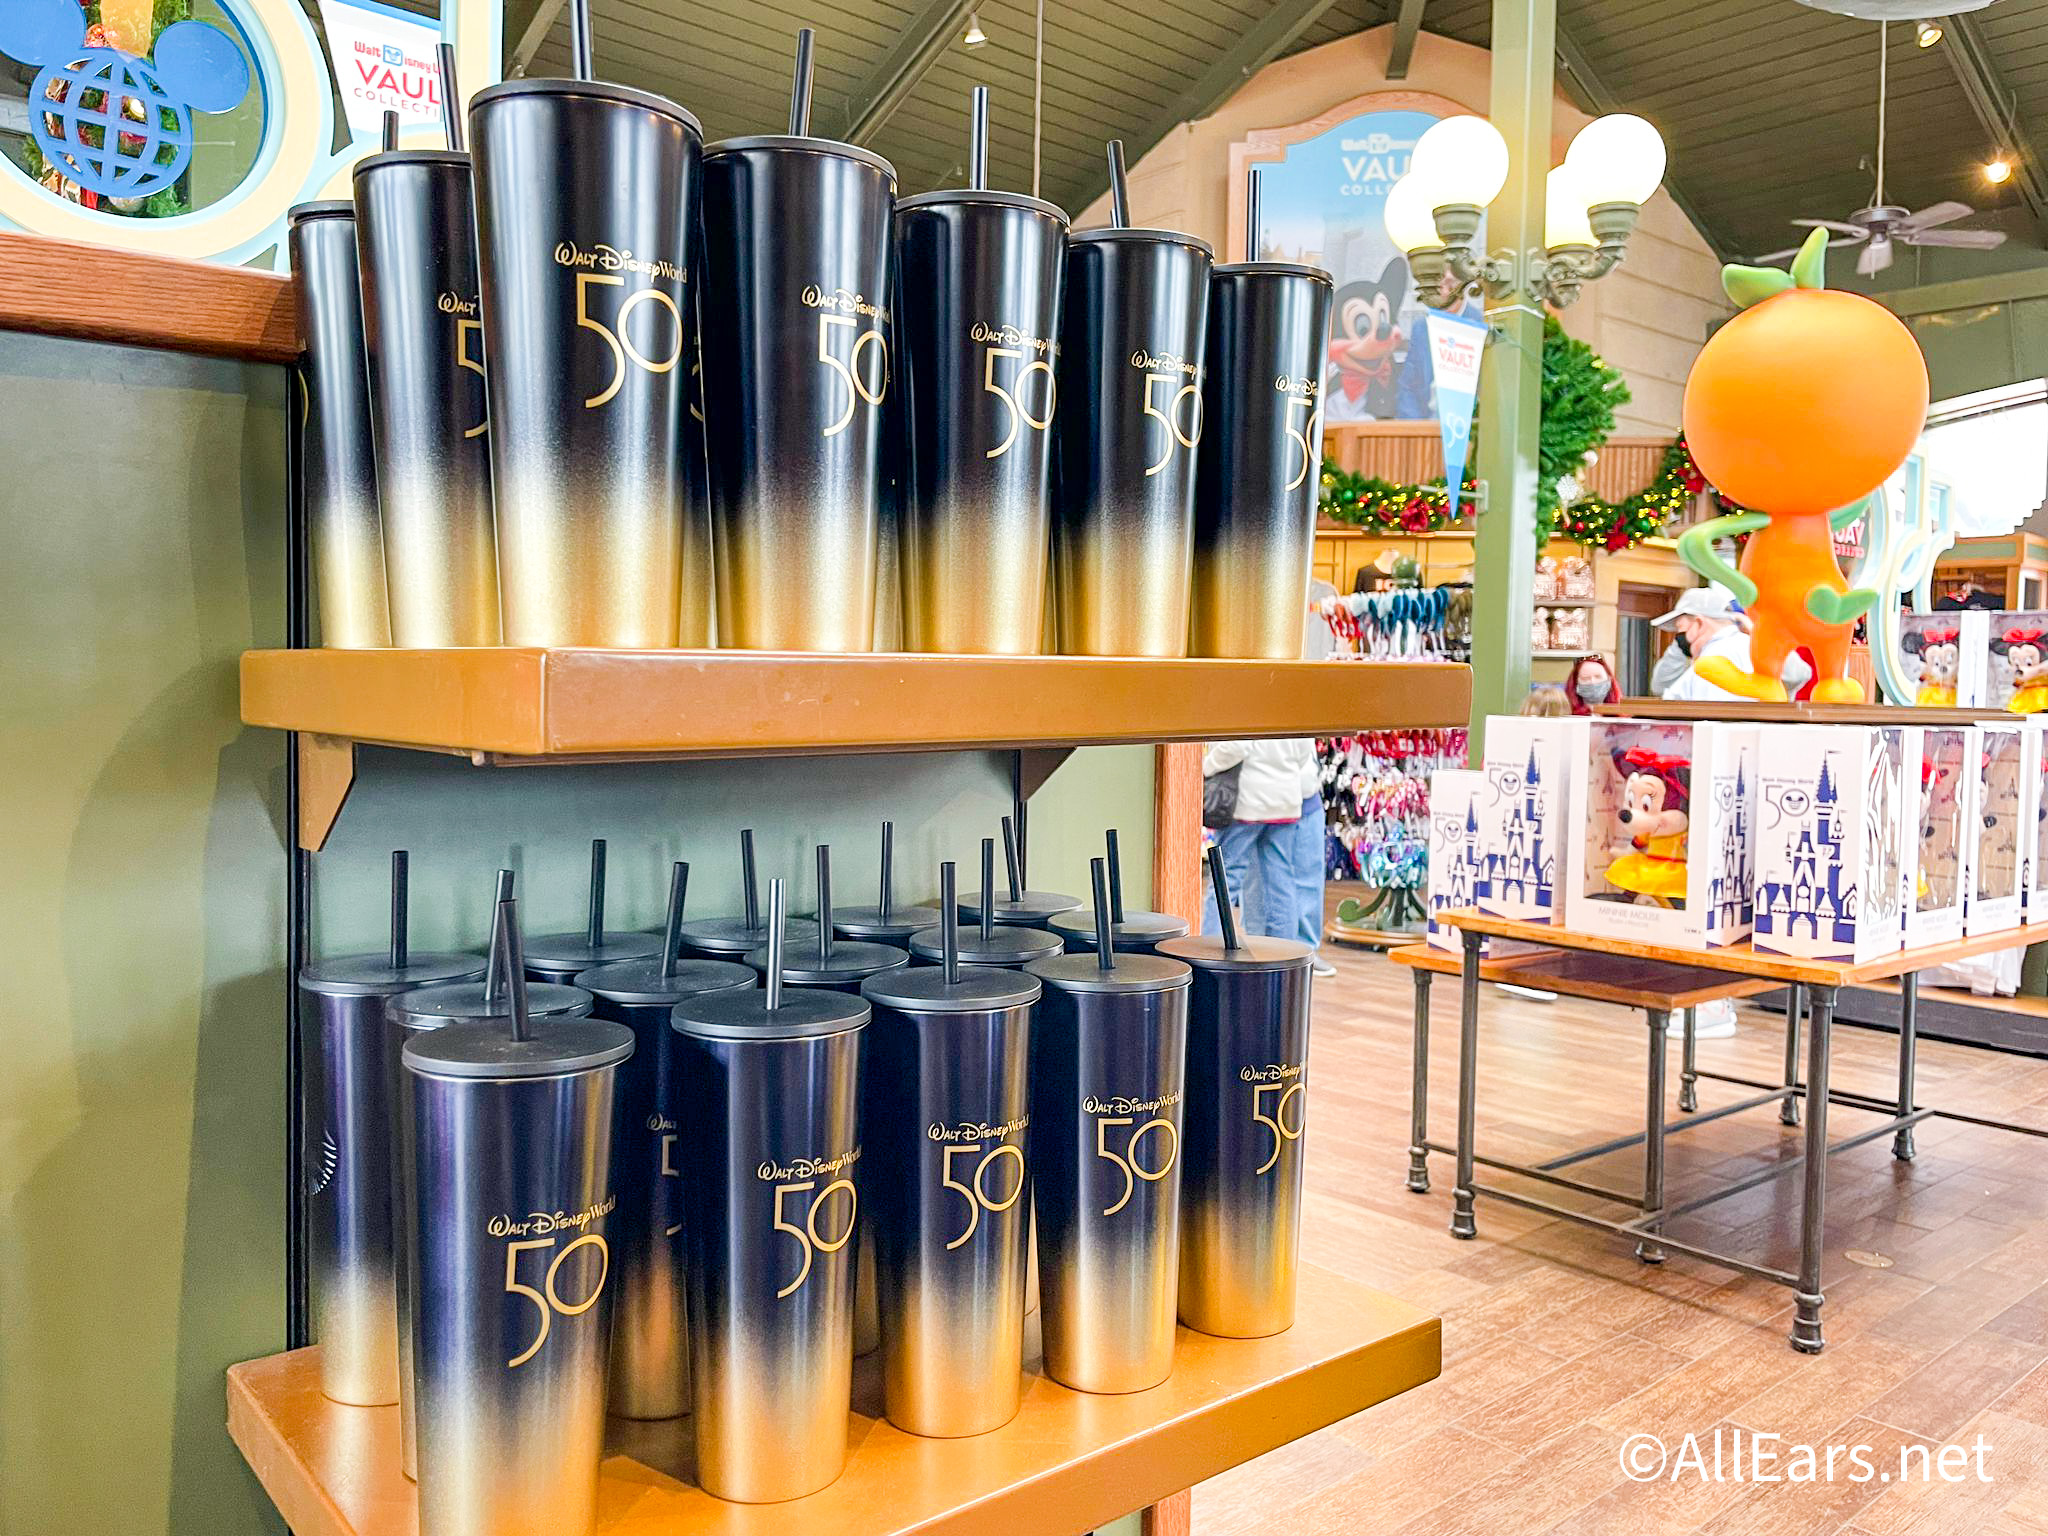 https://allears.net/wp-content/uploads/2021/12/2021-WDW-epcot-50th-anniversary-gold-and-black-tumblers-starbucks-44.jpg